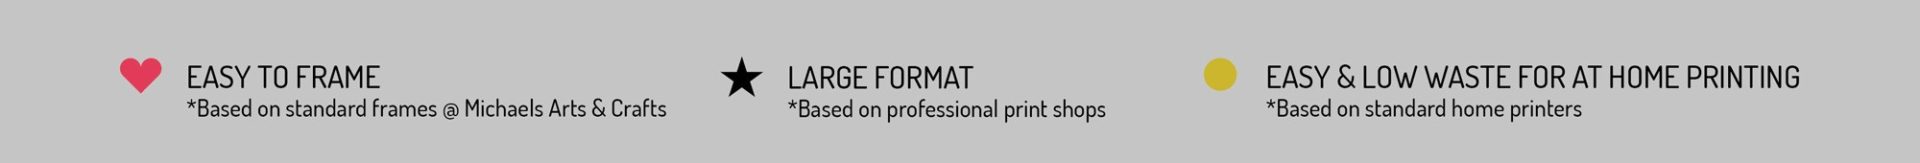 paper printing size guide key graphic